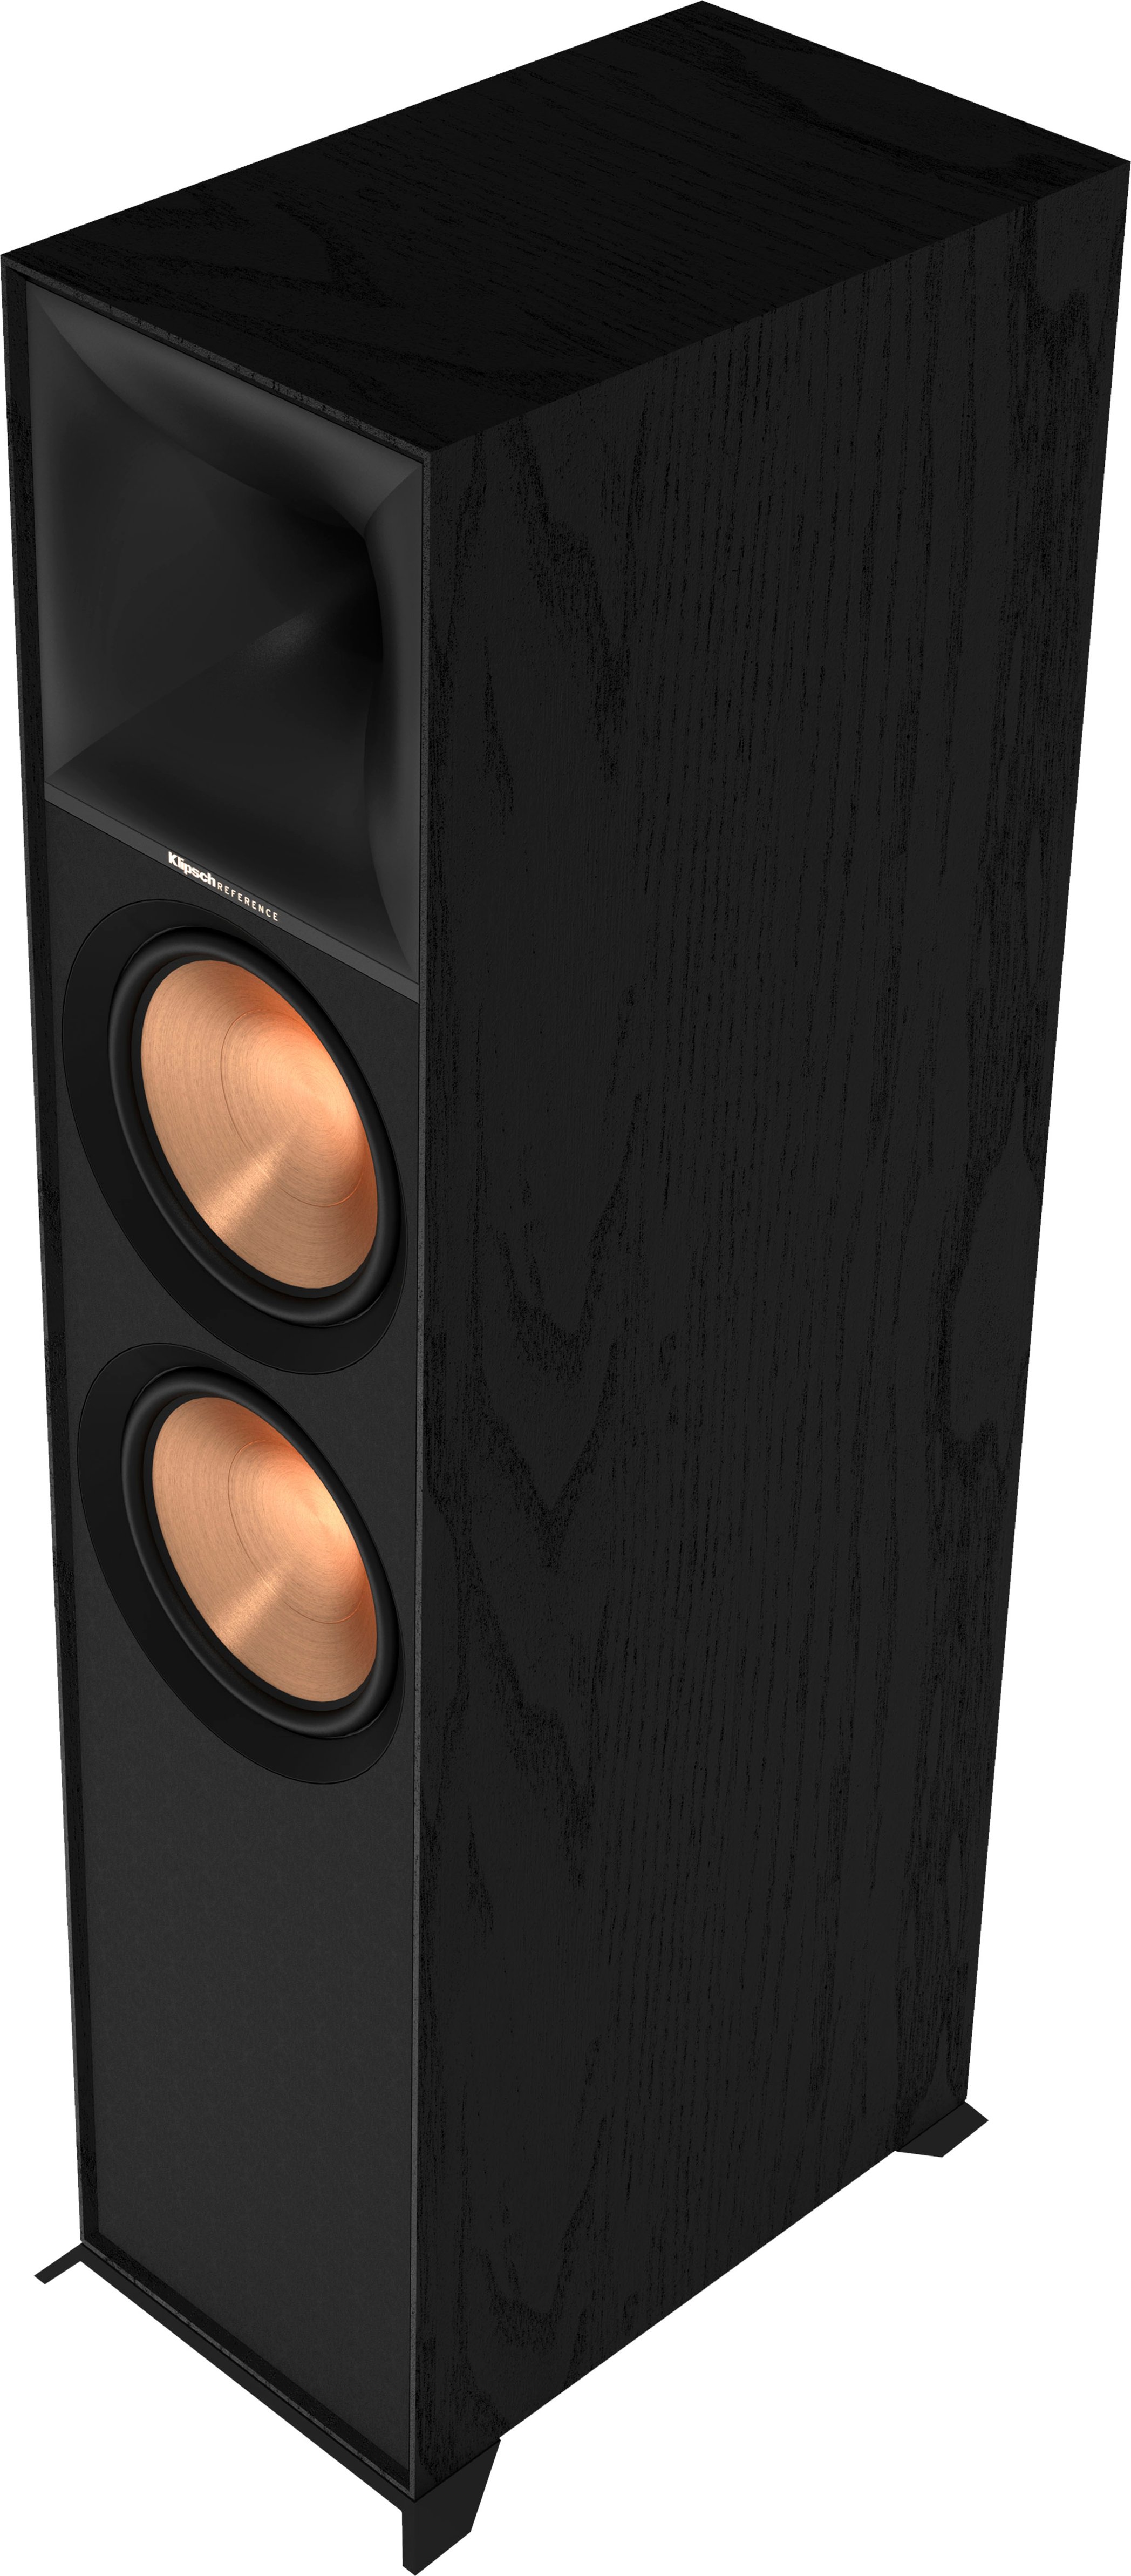 Customer Reviews: Klipsch Reference 800 Series Dual 8